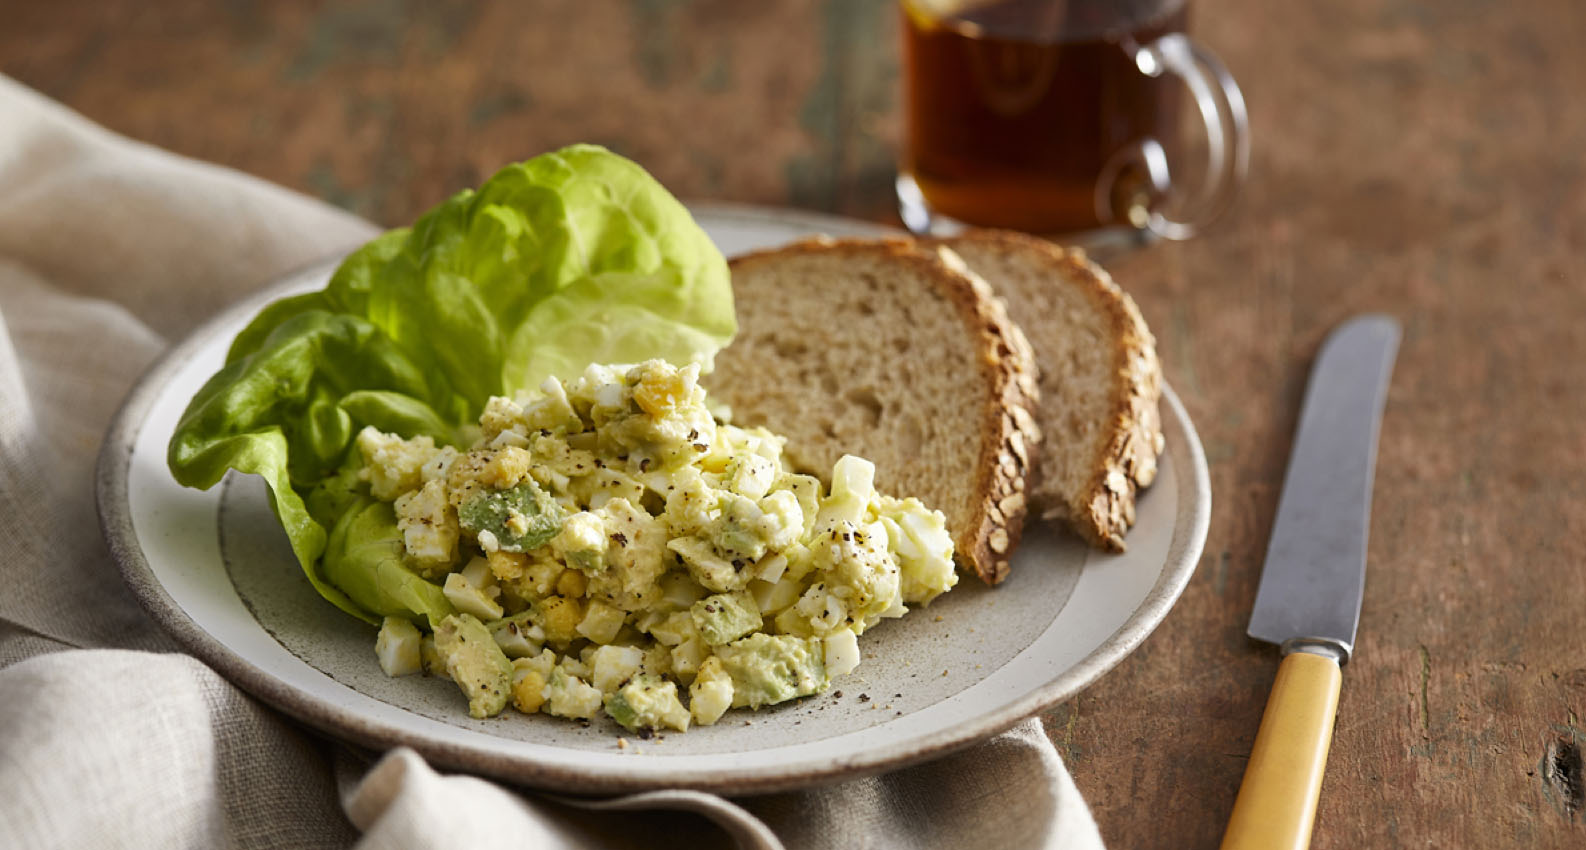 Avocado egg salad with bread and lettuce